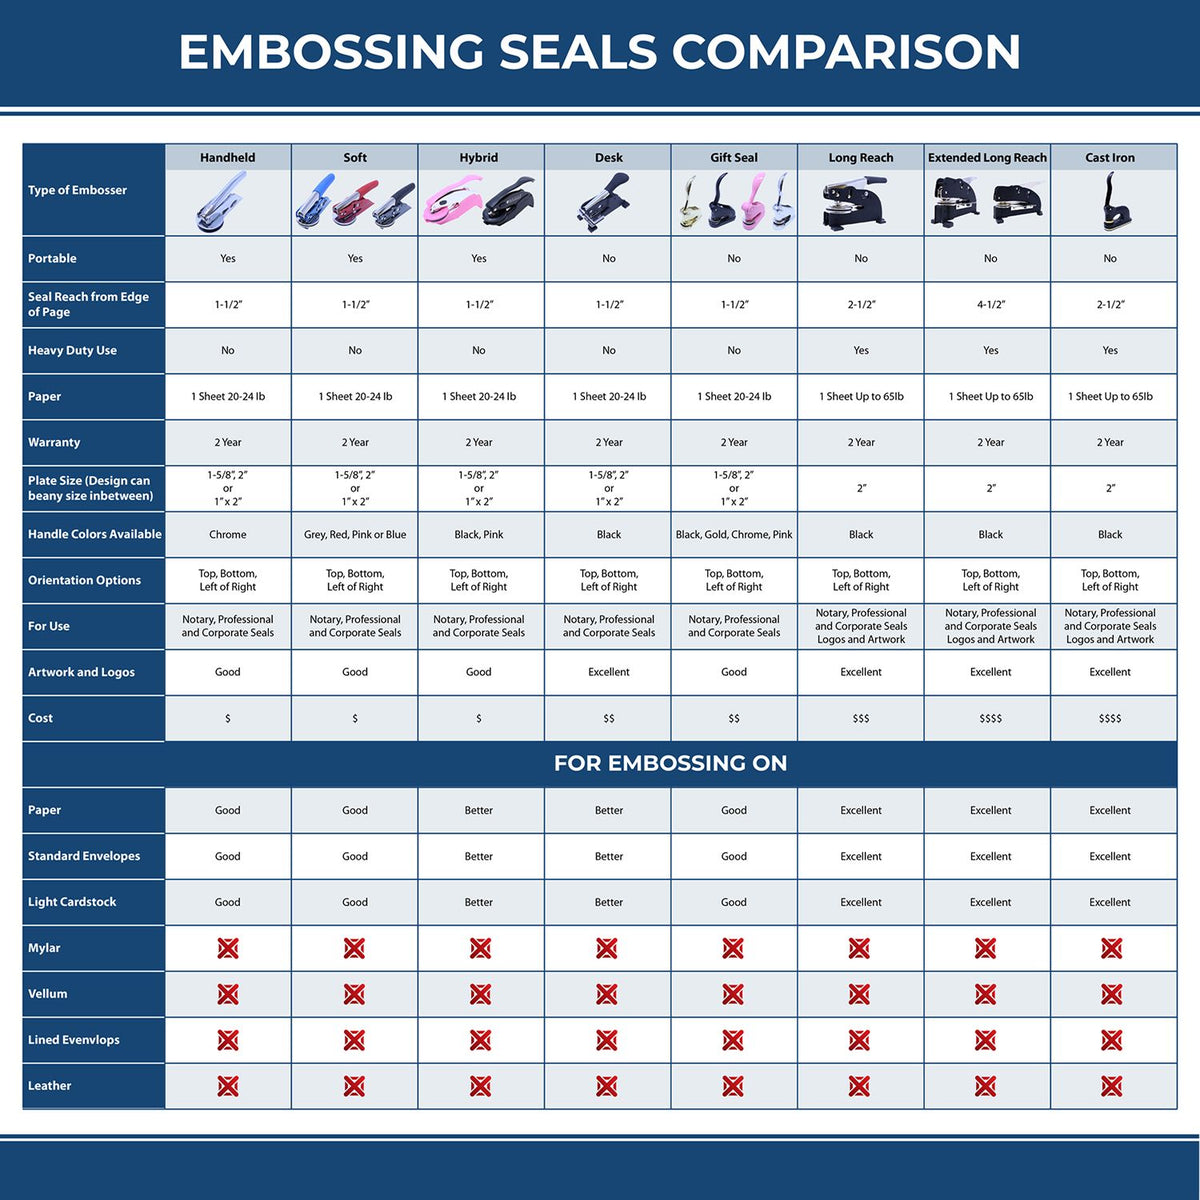 A comparison chart for the different types of mount models available for the State of Delaware Soft Land Surveyor Embossing Seal.